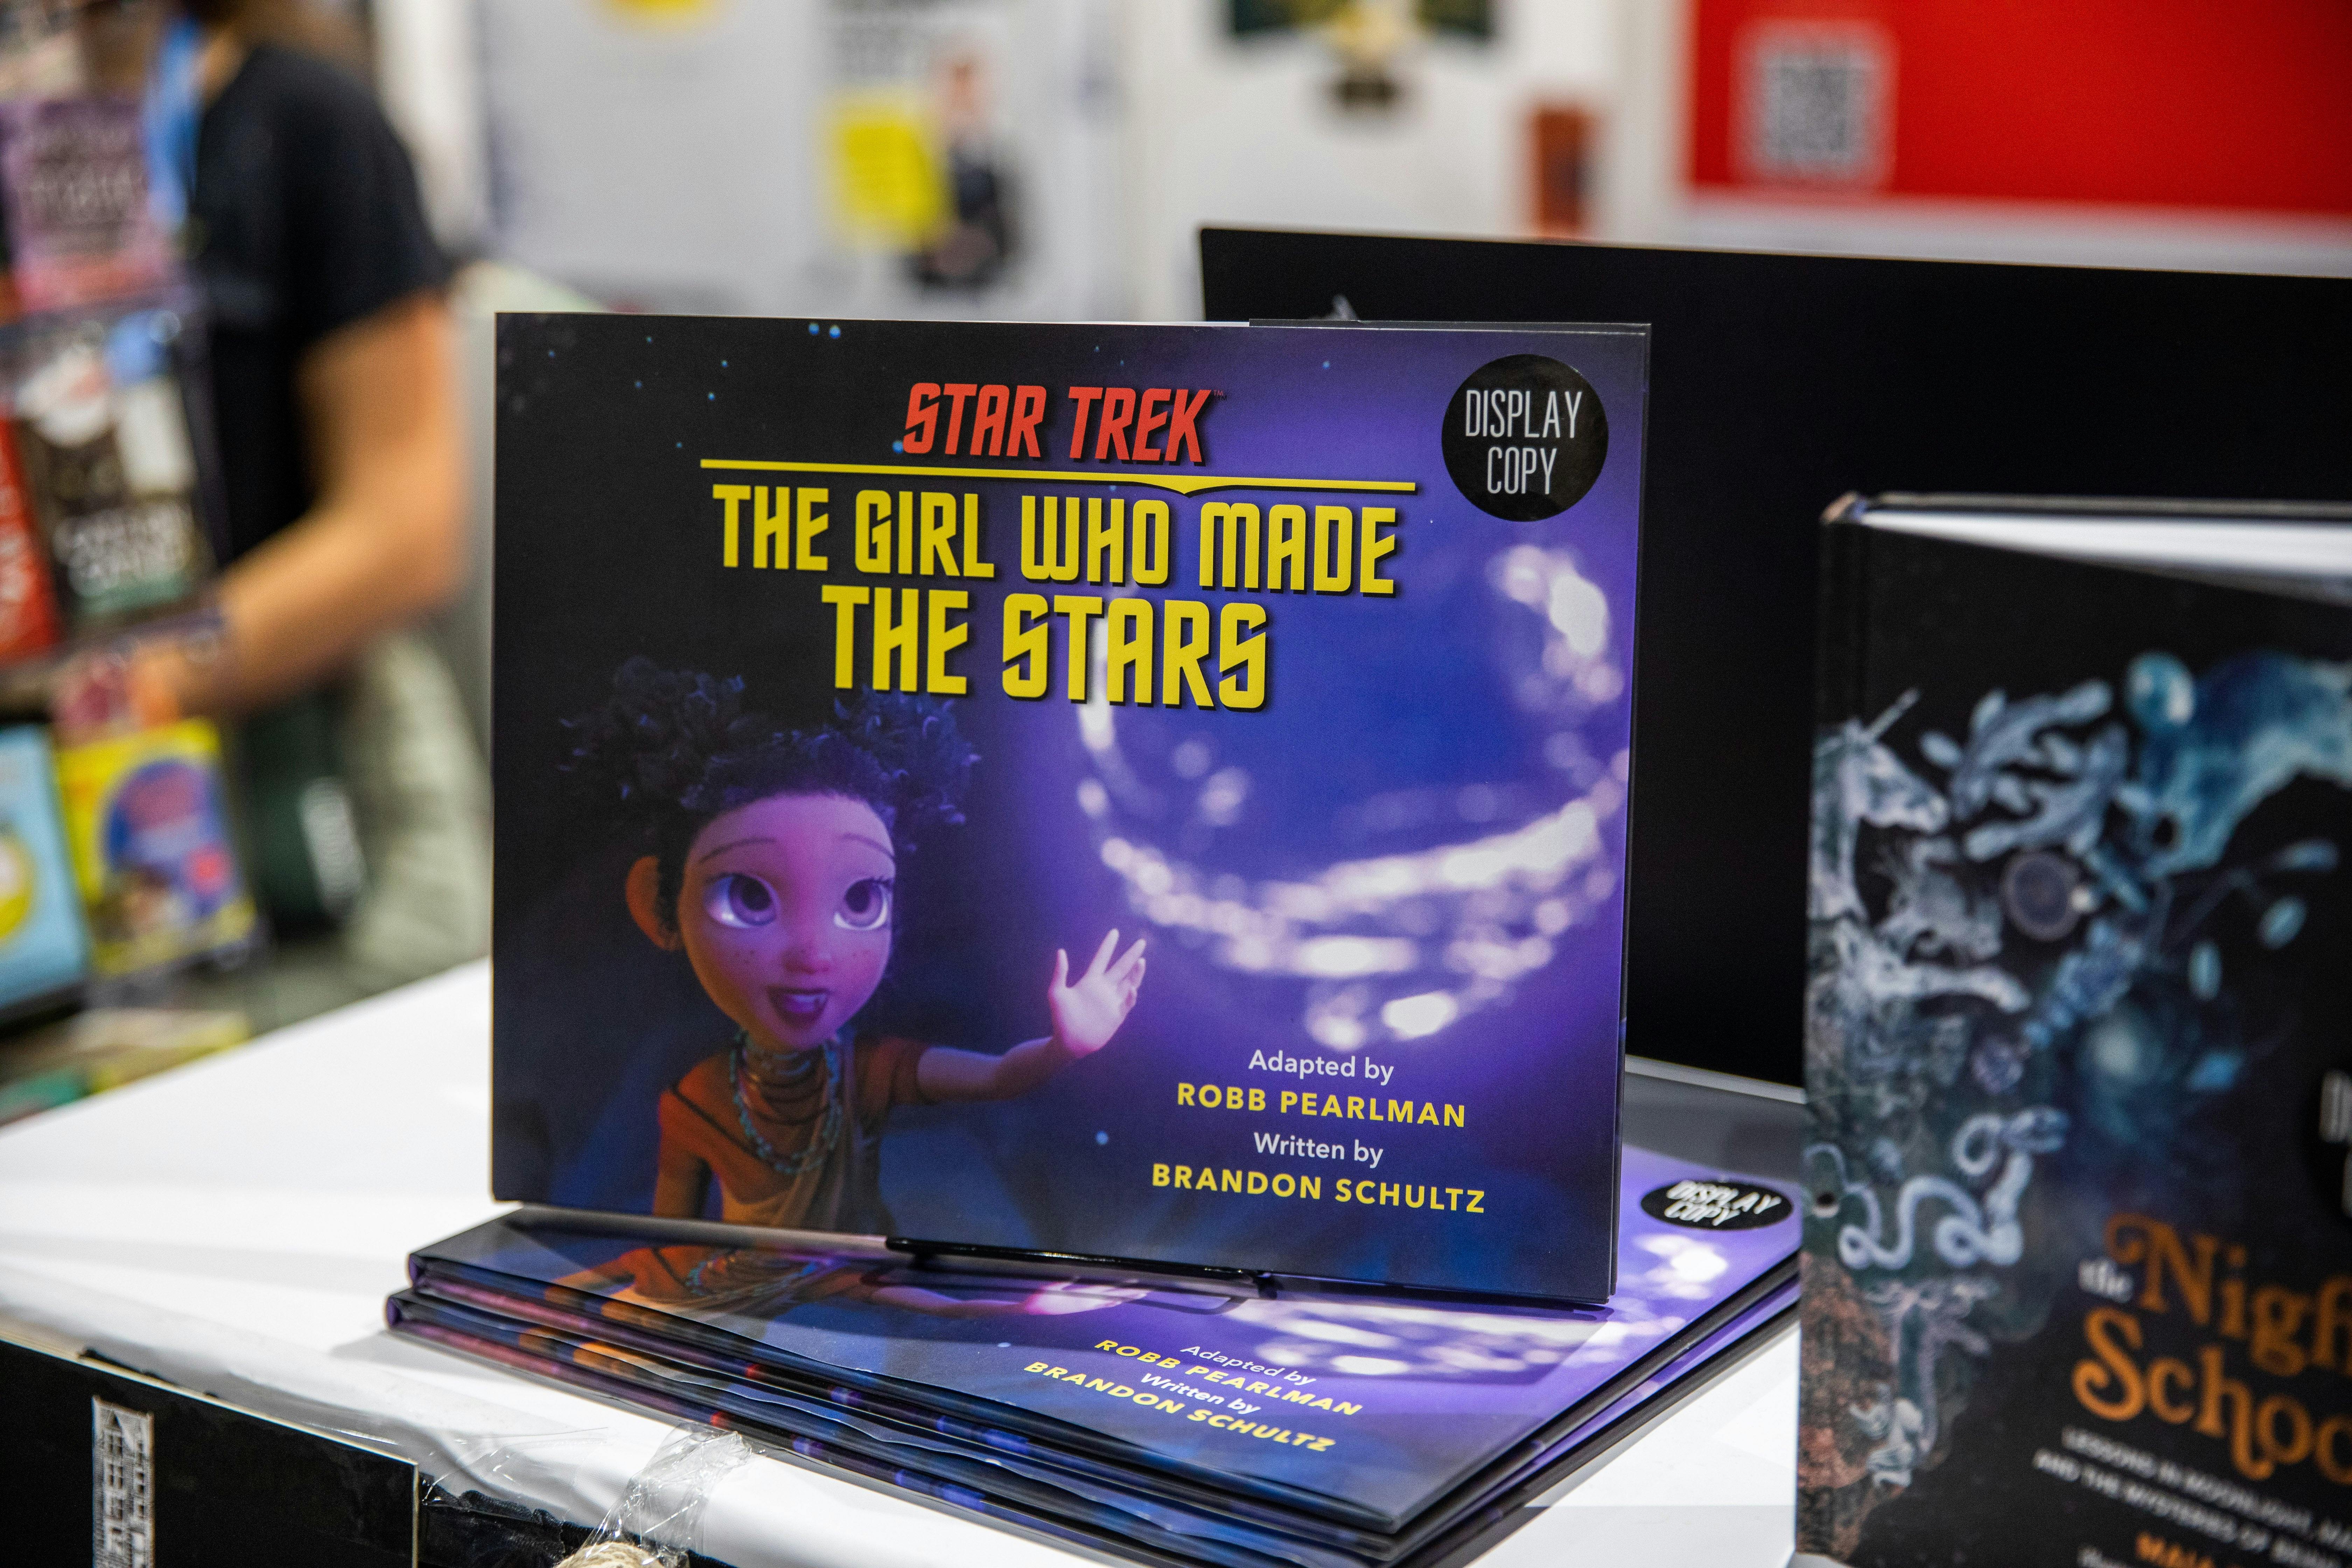 The display copy of upcoming picture book Star Trek: The Girl Who Made the Stars, based on the Short Treks episode.